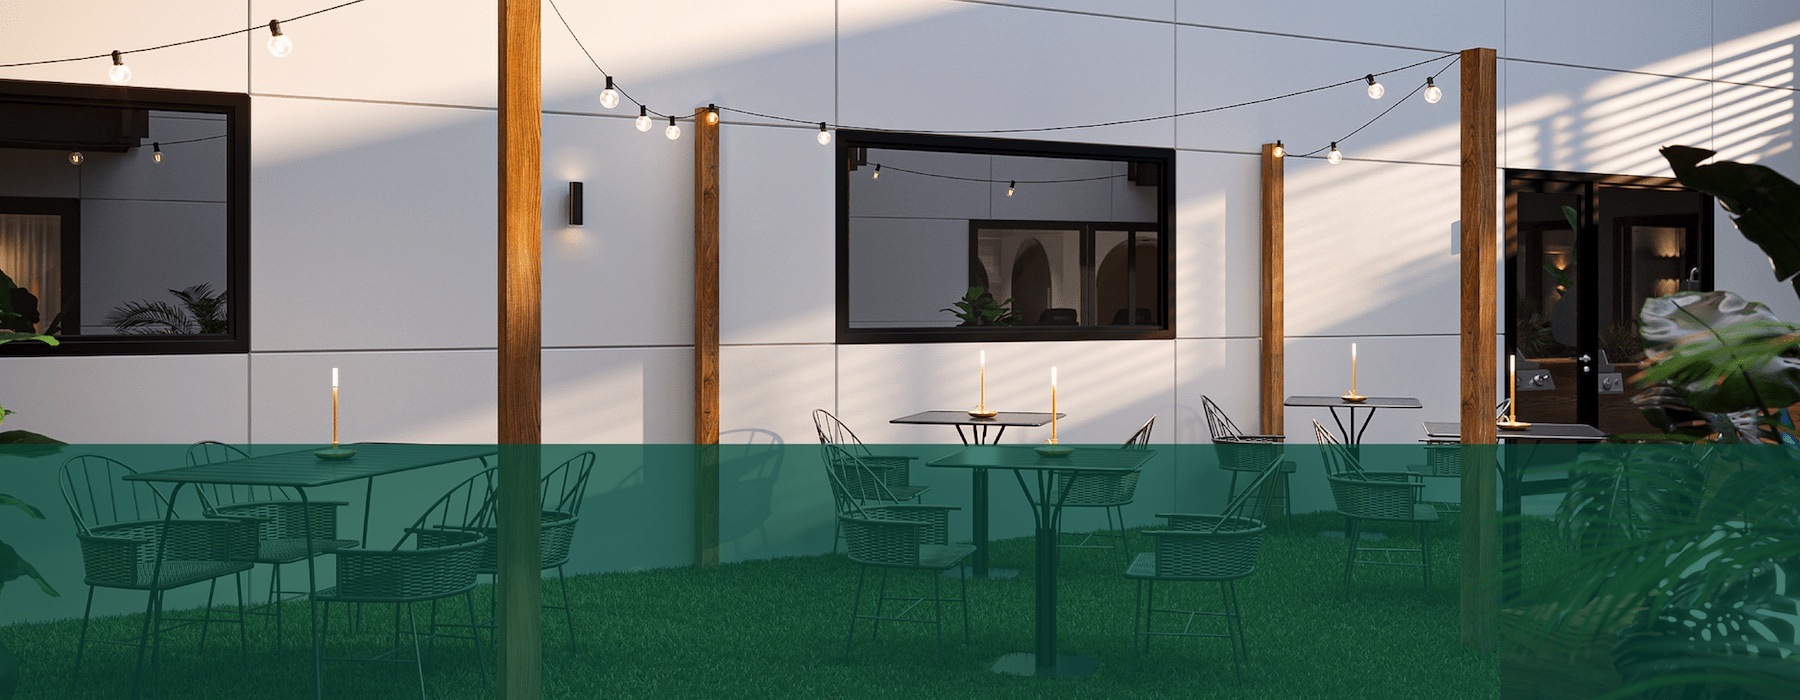 rendering of outside lounge with string lights and spacious seating